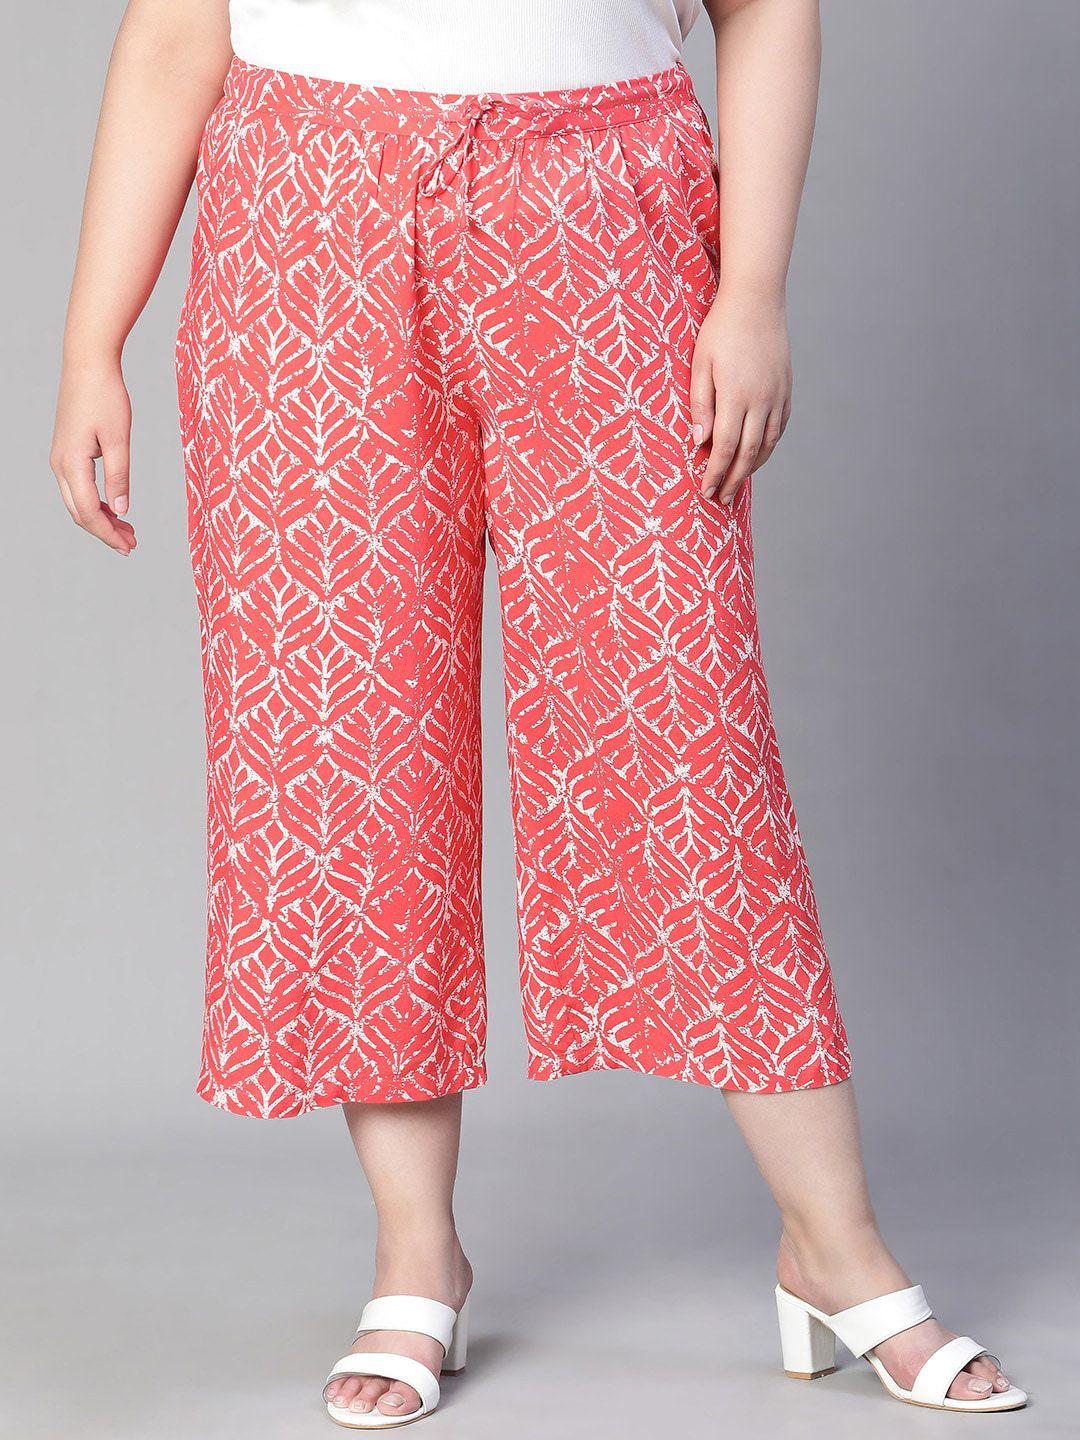 oxolloxo-women-plus-size-printed-relaxed-straight-fit-easy-wash-culottes